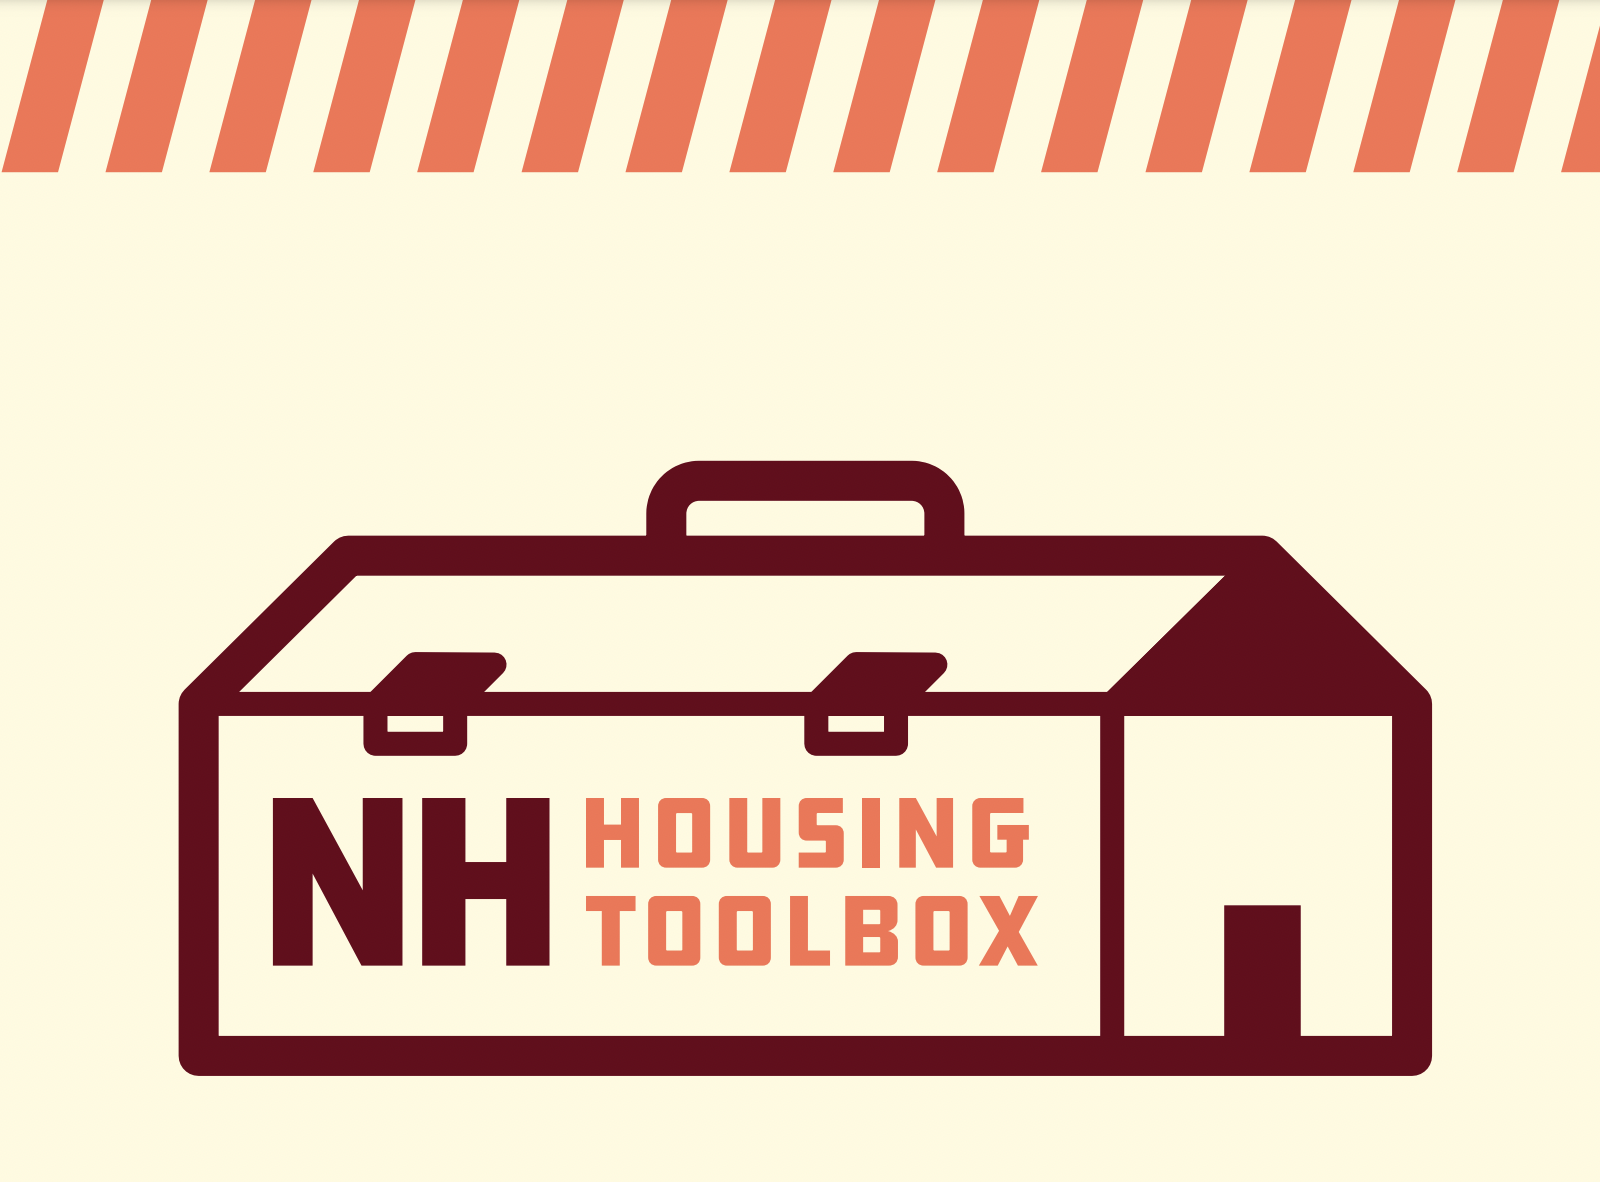 a beige background with orange hashmarks at the top. a toolbox/house holds maroon text that reads "NH Housing Toolbox"